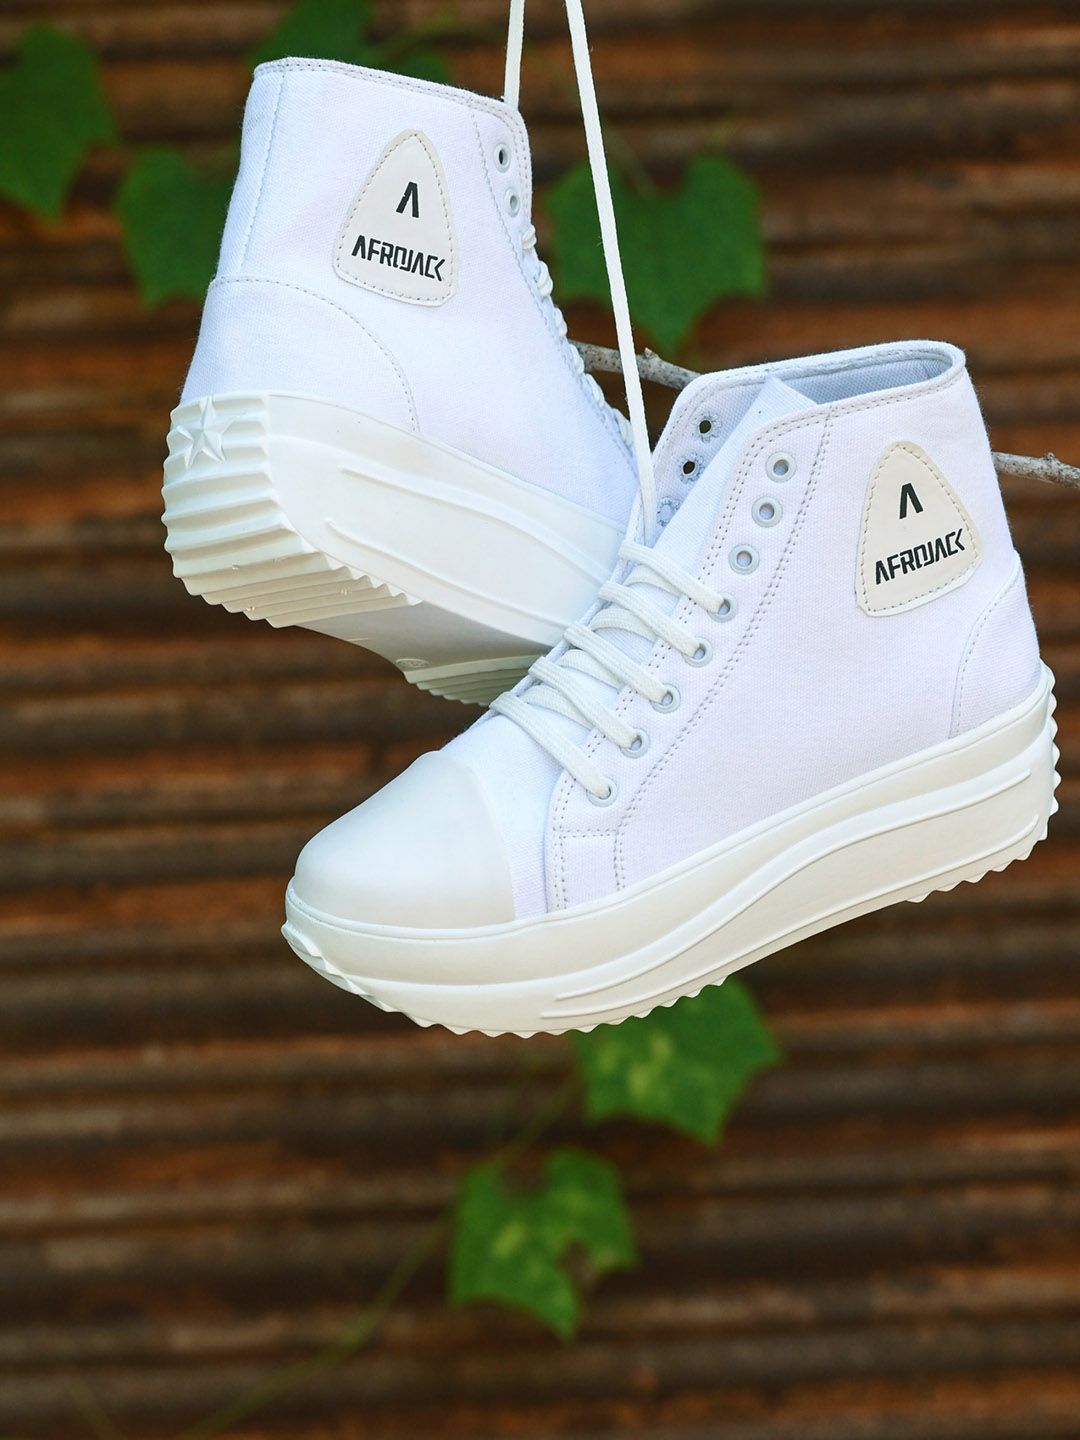 AfroJack Women White Canvas Lace-Up Sneakers Price in India